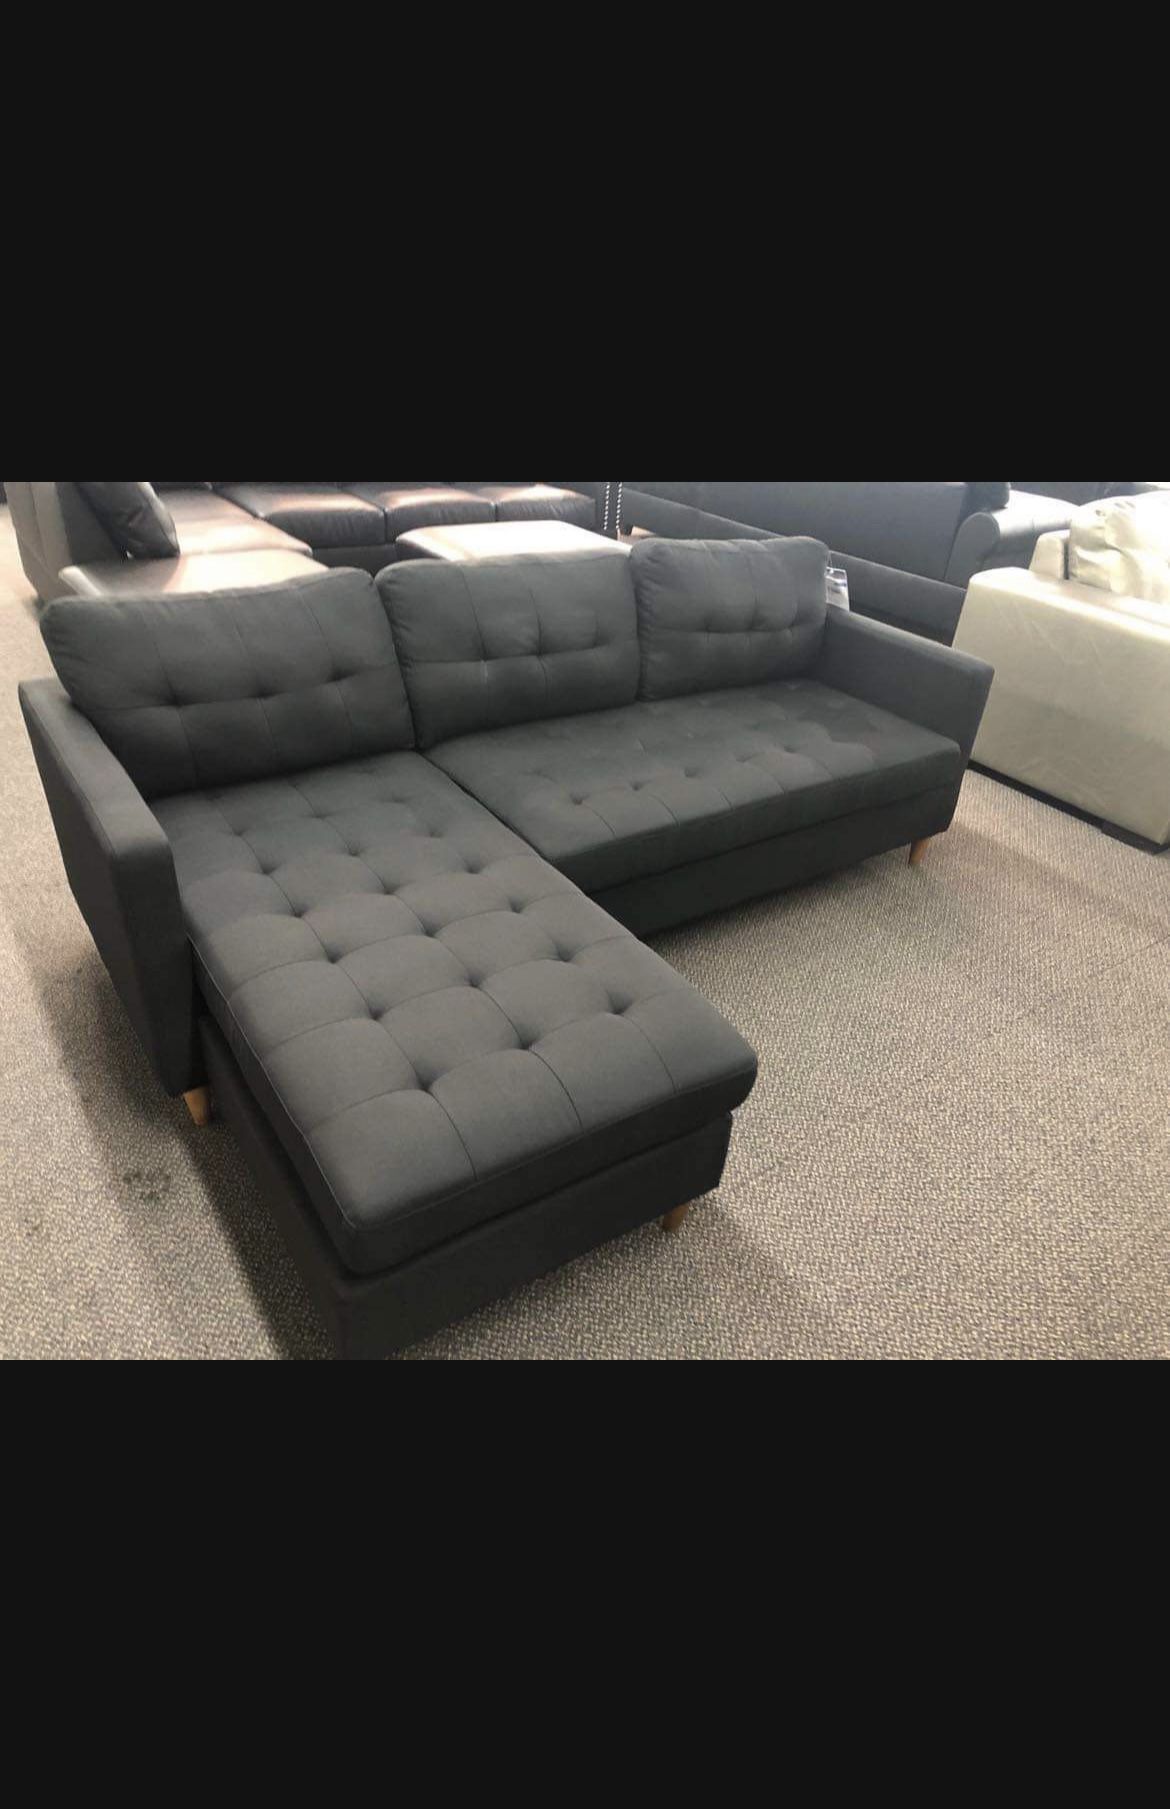 New black nailhead sectional couch includes free delivery 